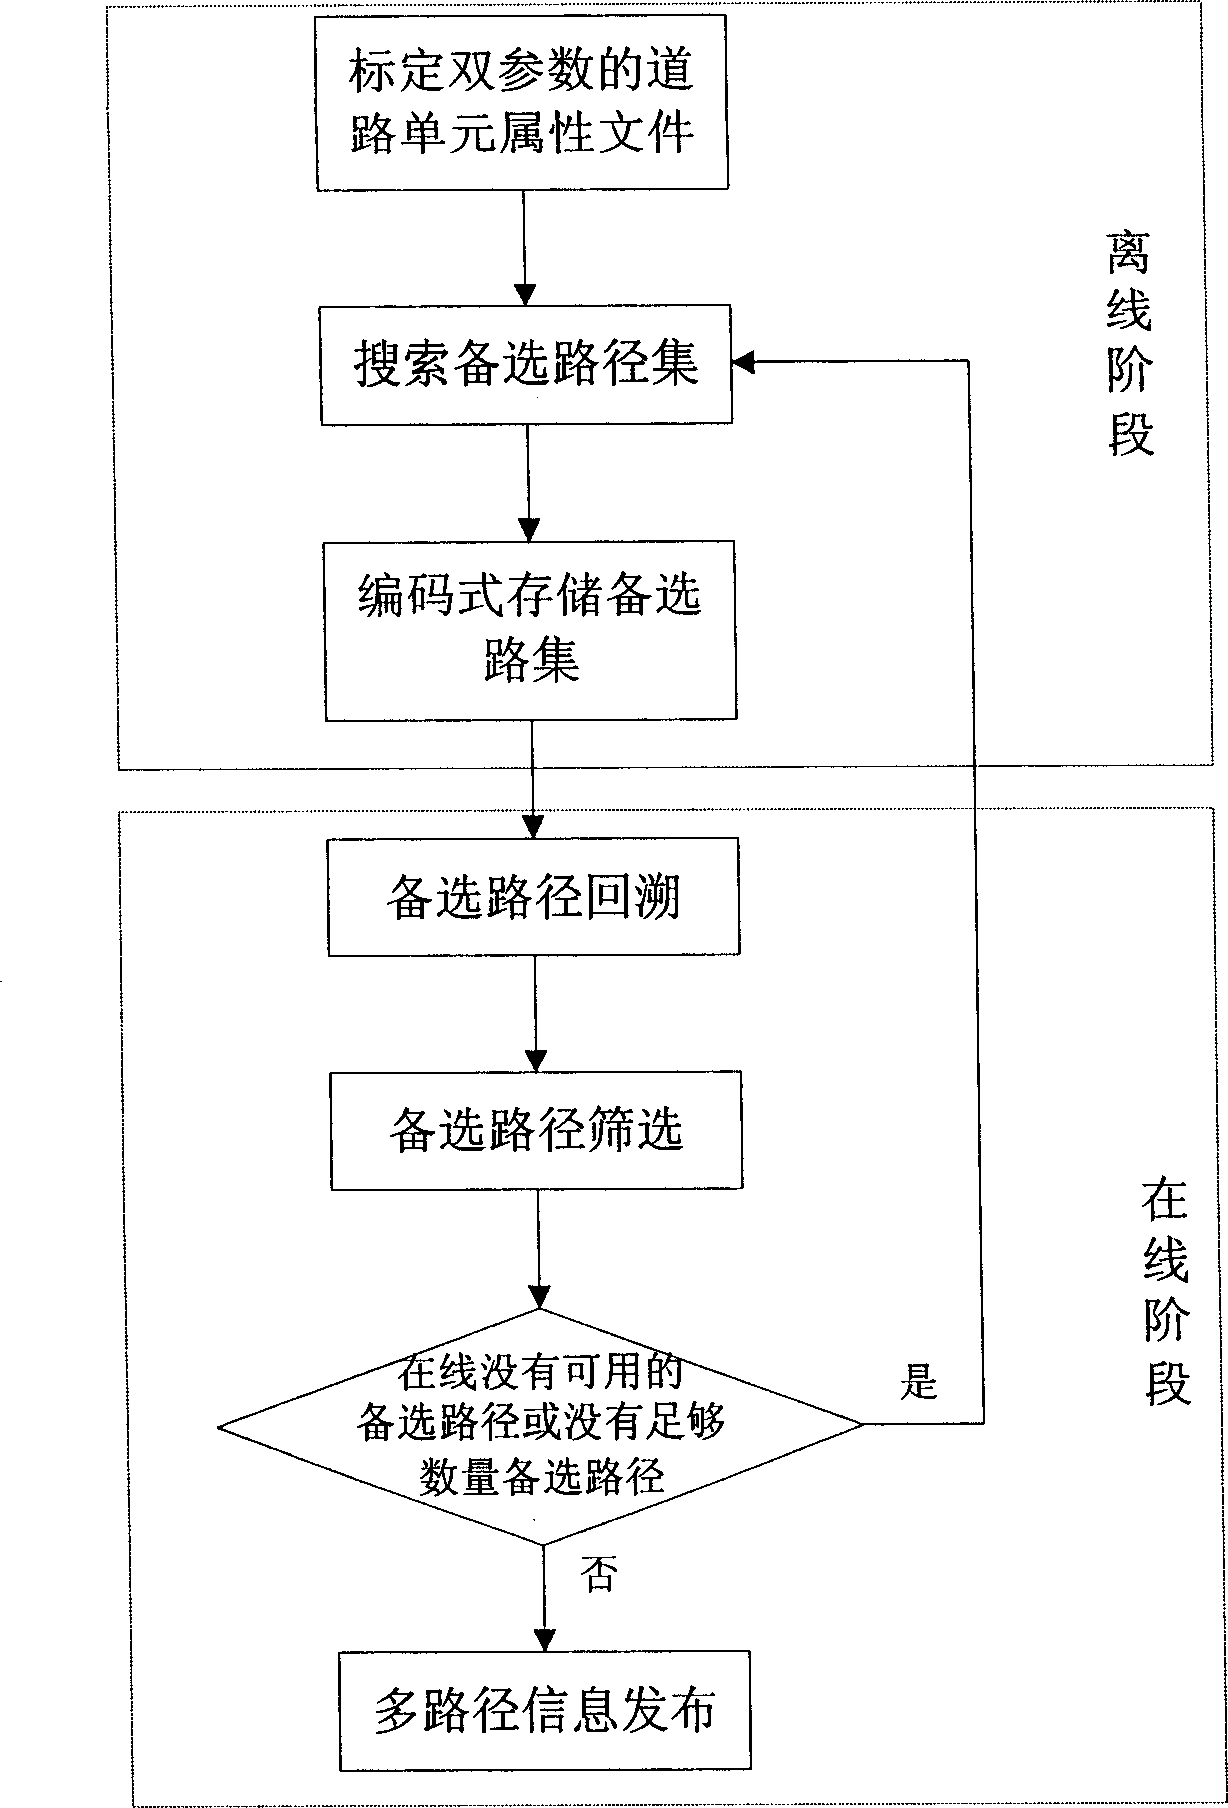 Two-step multi-path optimization method for central controlled vehicle information system